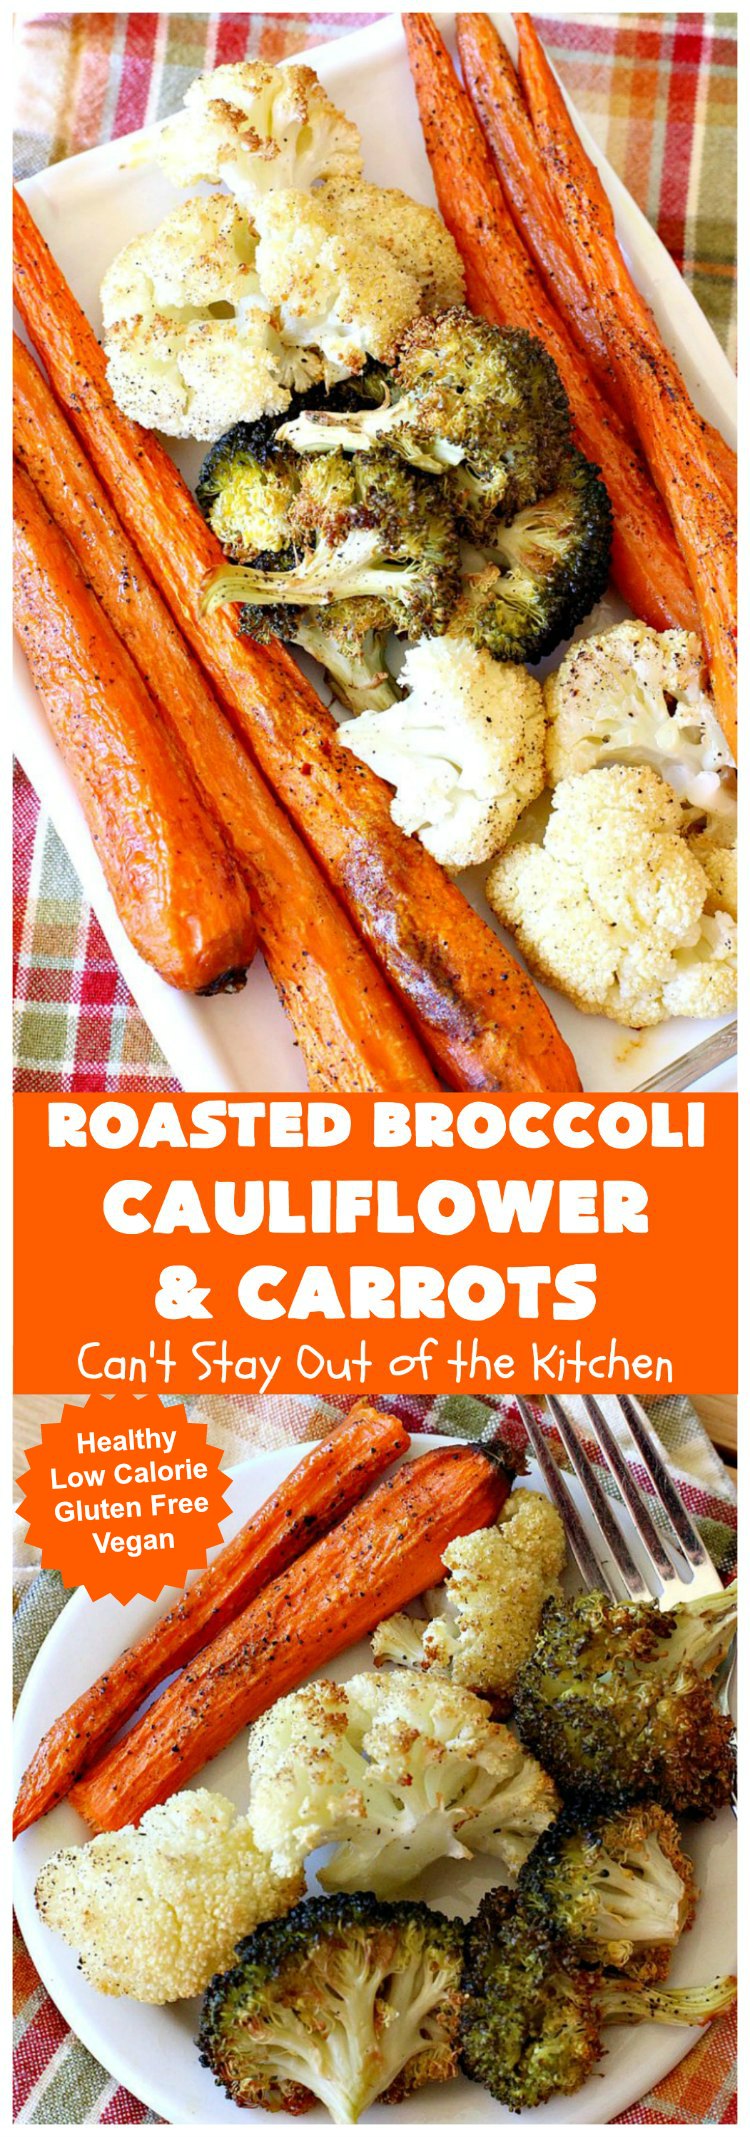 Roasted Broccoli, Cauliflower and Carrots | Can't Stay Out of the Kitchen | this easy, simple & delicious #vegetable #SideDish is wonderful for any entree. It's also great for #MeatlessMondays. #Vegan #GlutenFree #Healthy #LowCalorie #CleanEating #carrots #Broccoli #Cauliflower #RoastedBroccoliCauliflowerAndCarrots